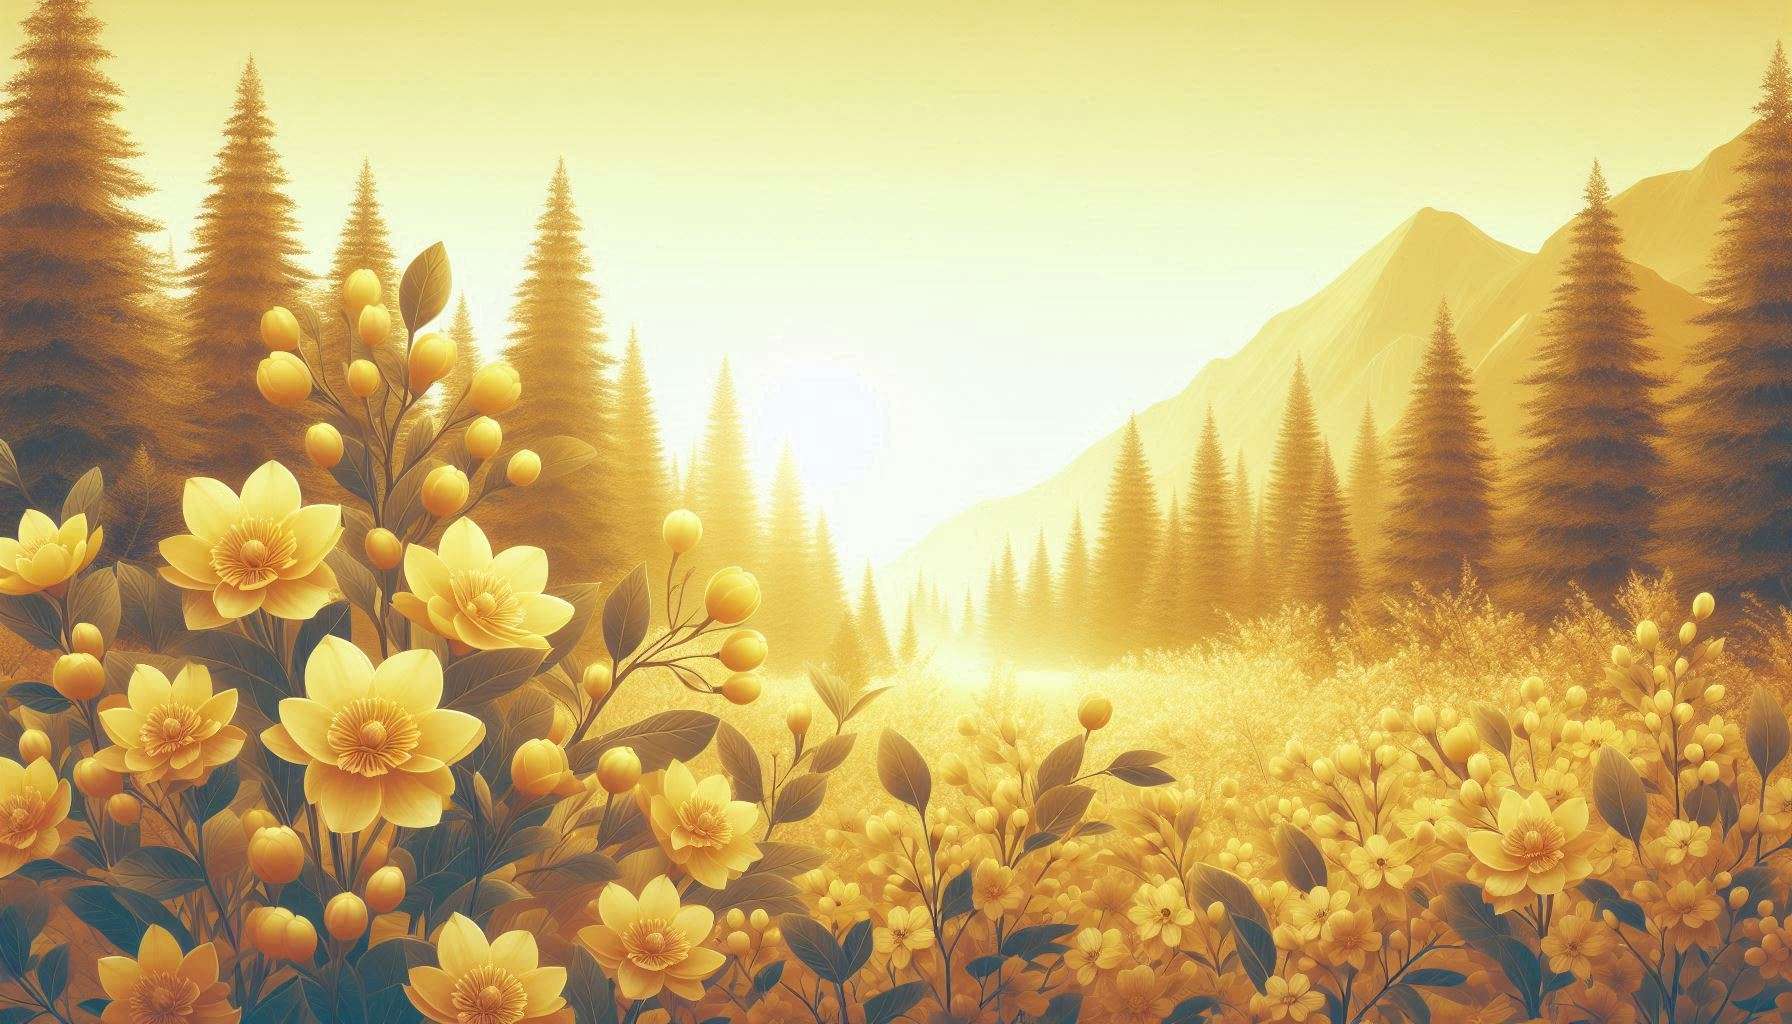 Download Free nature light yellow background with flower for websites, slideshows, and designs | royalty-free and unlimited use.